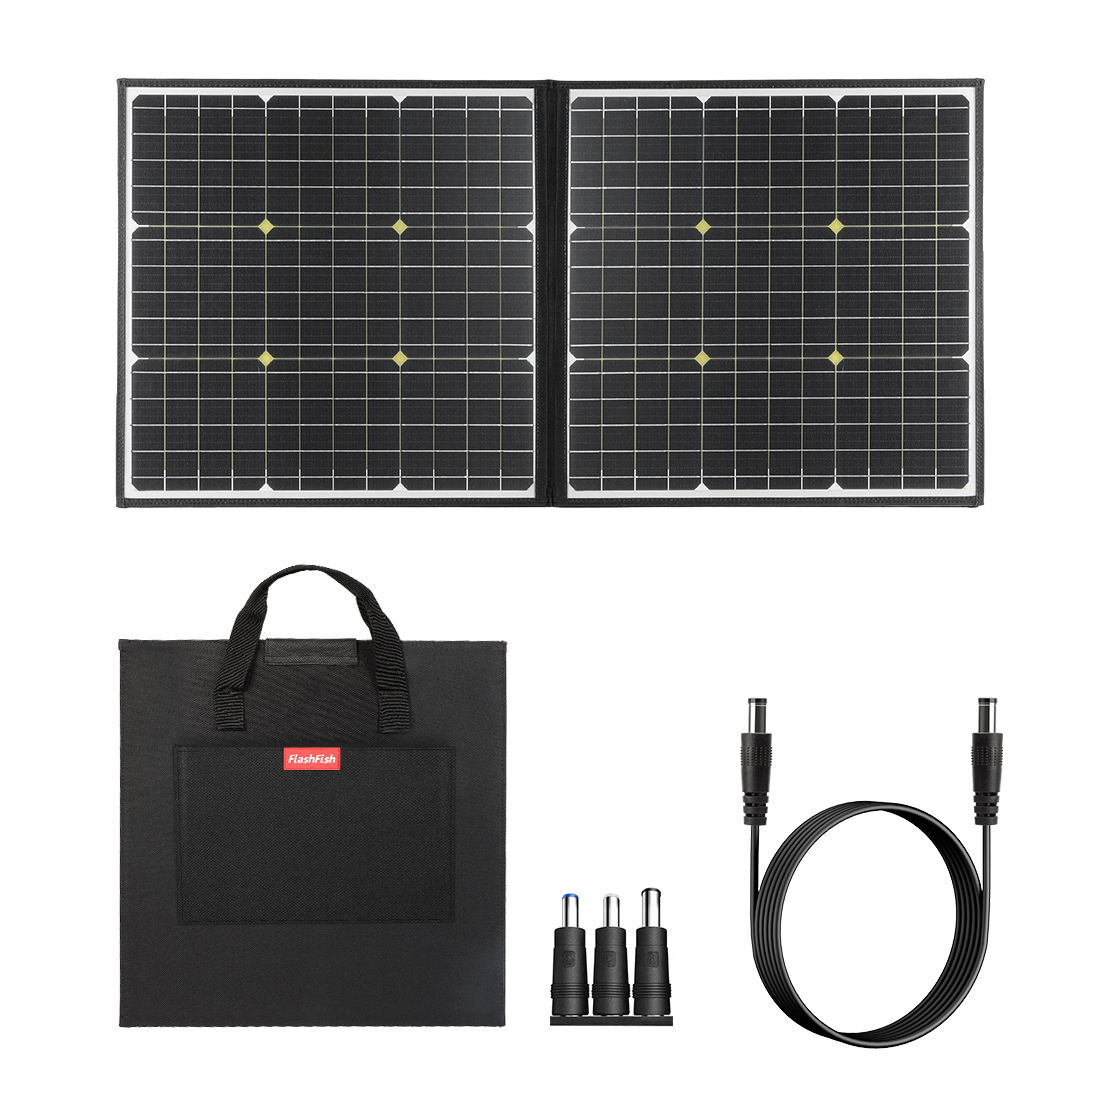 Find EU/US Direct Flashfish 100W 18V Portable Solar Panel 5V USB Foldable Solar Cells Outdoor Power Supply Camping Garden For Power Station for Sale on Gipsybee.com with cryptocurrencies